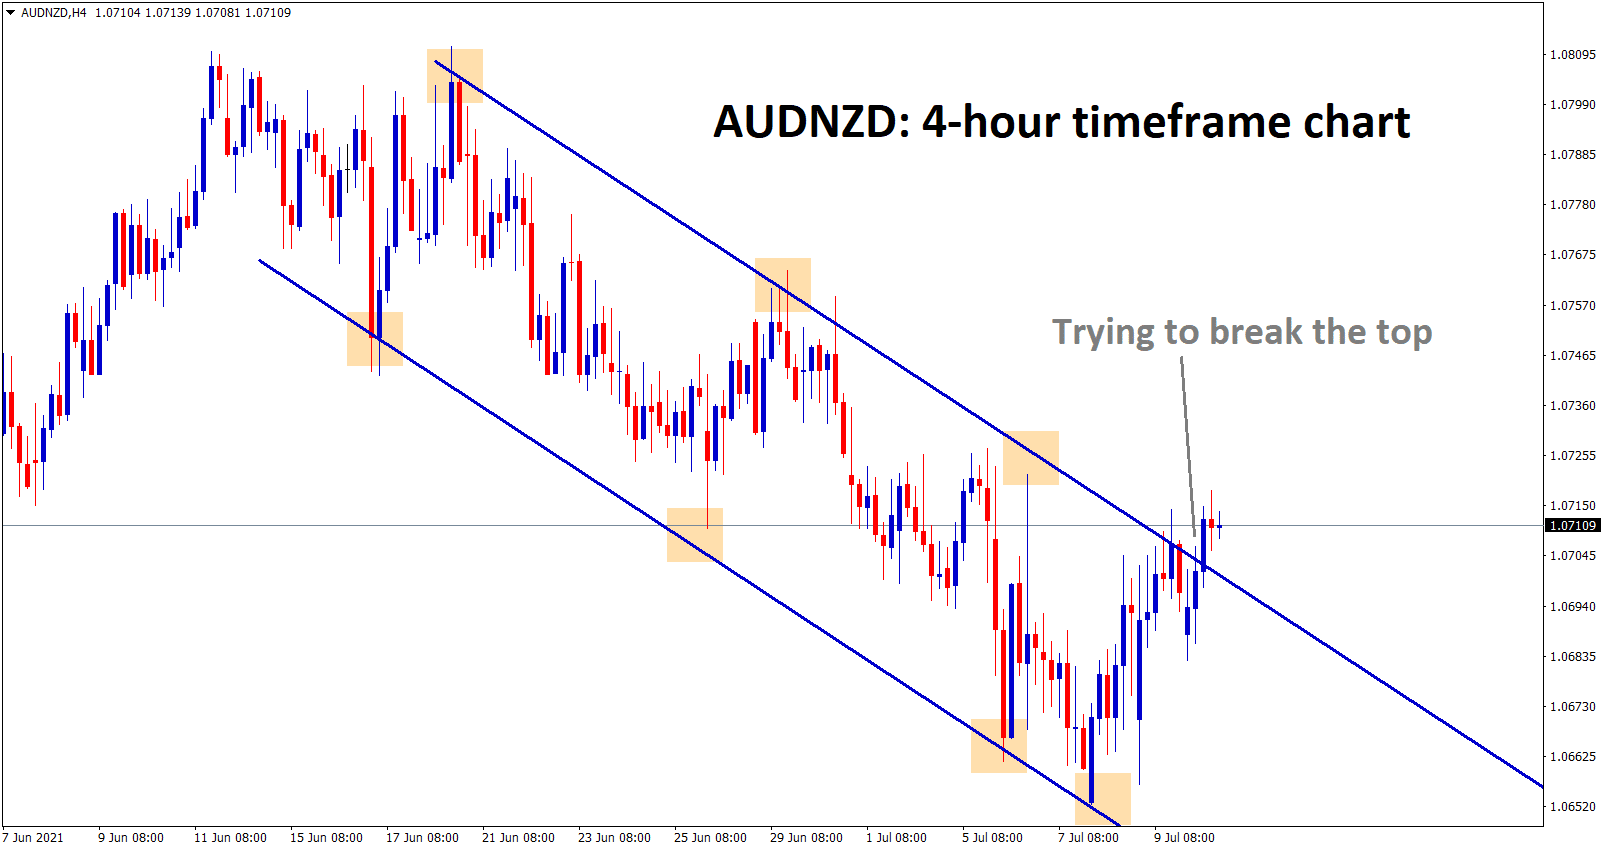 AUDNZD is trying to break the top of the descending channel